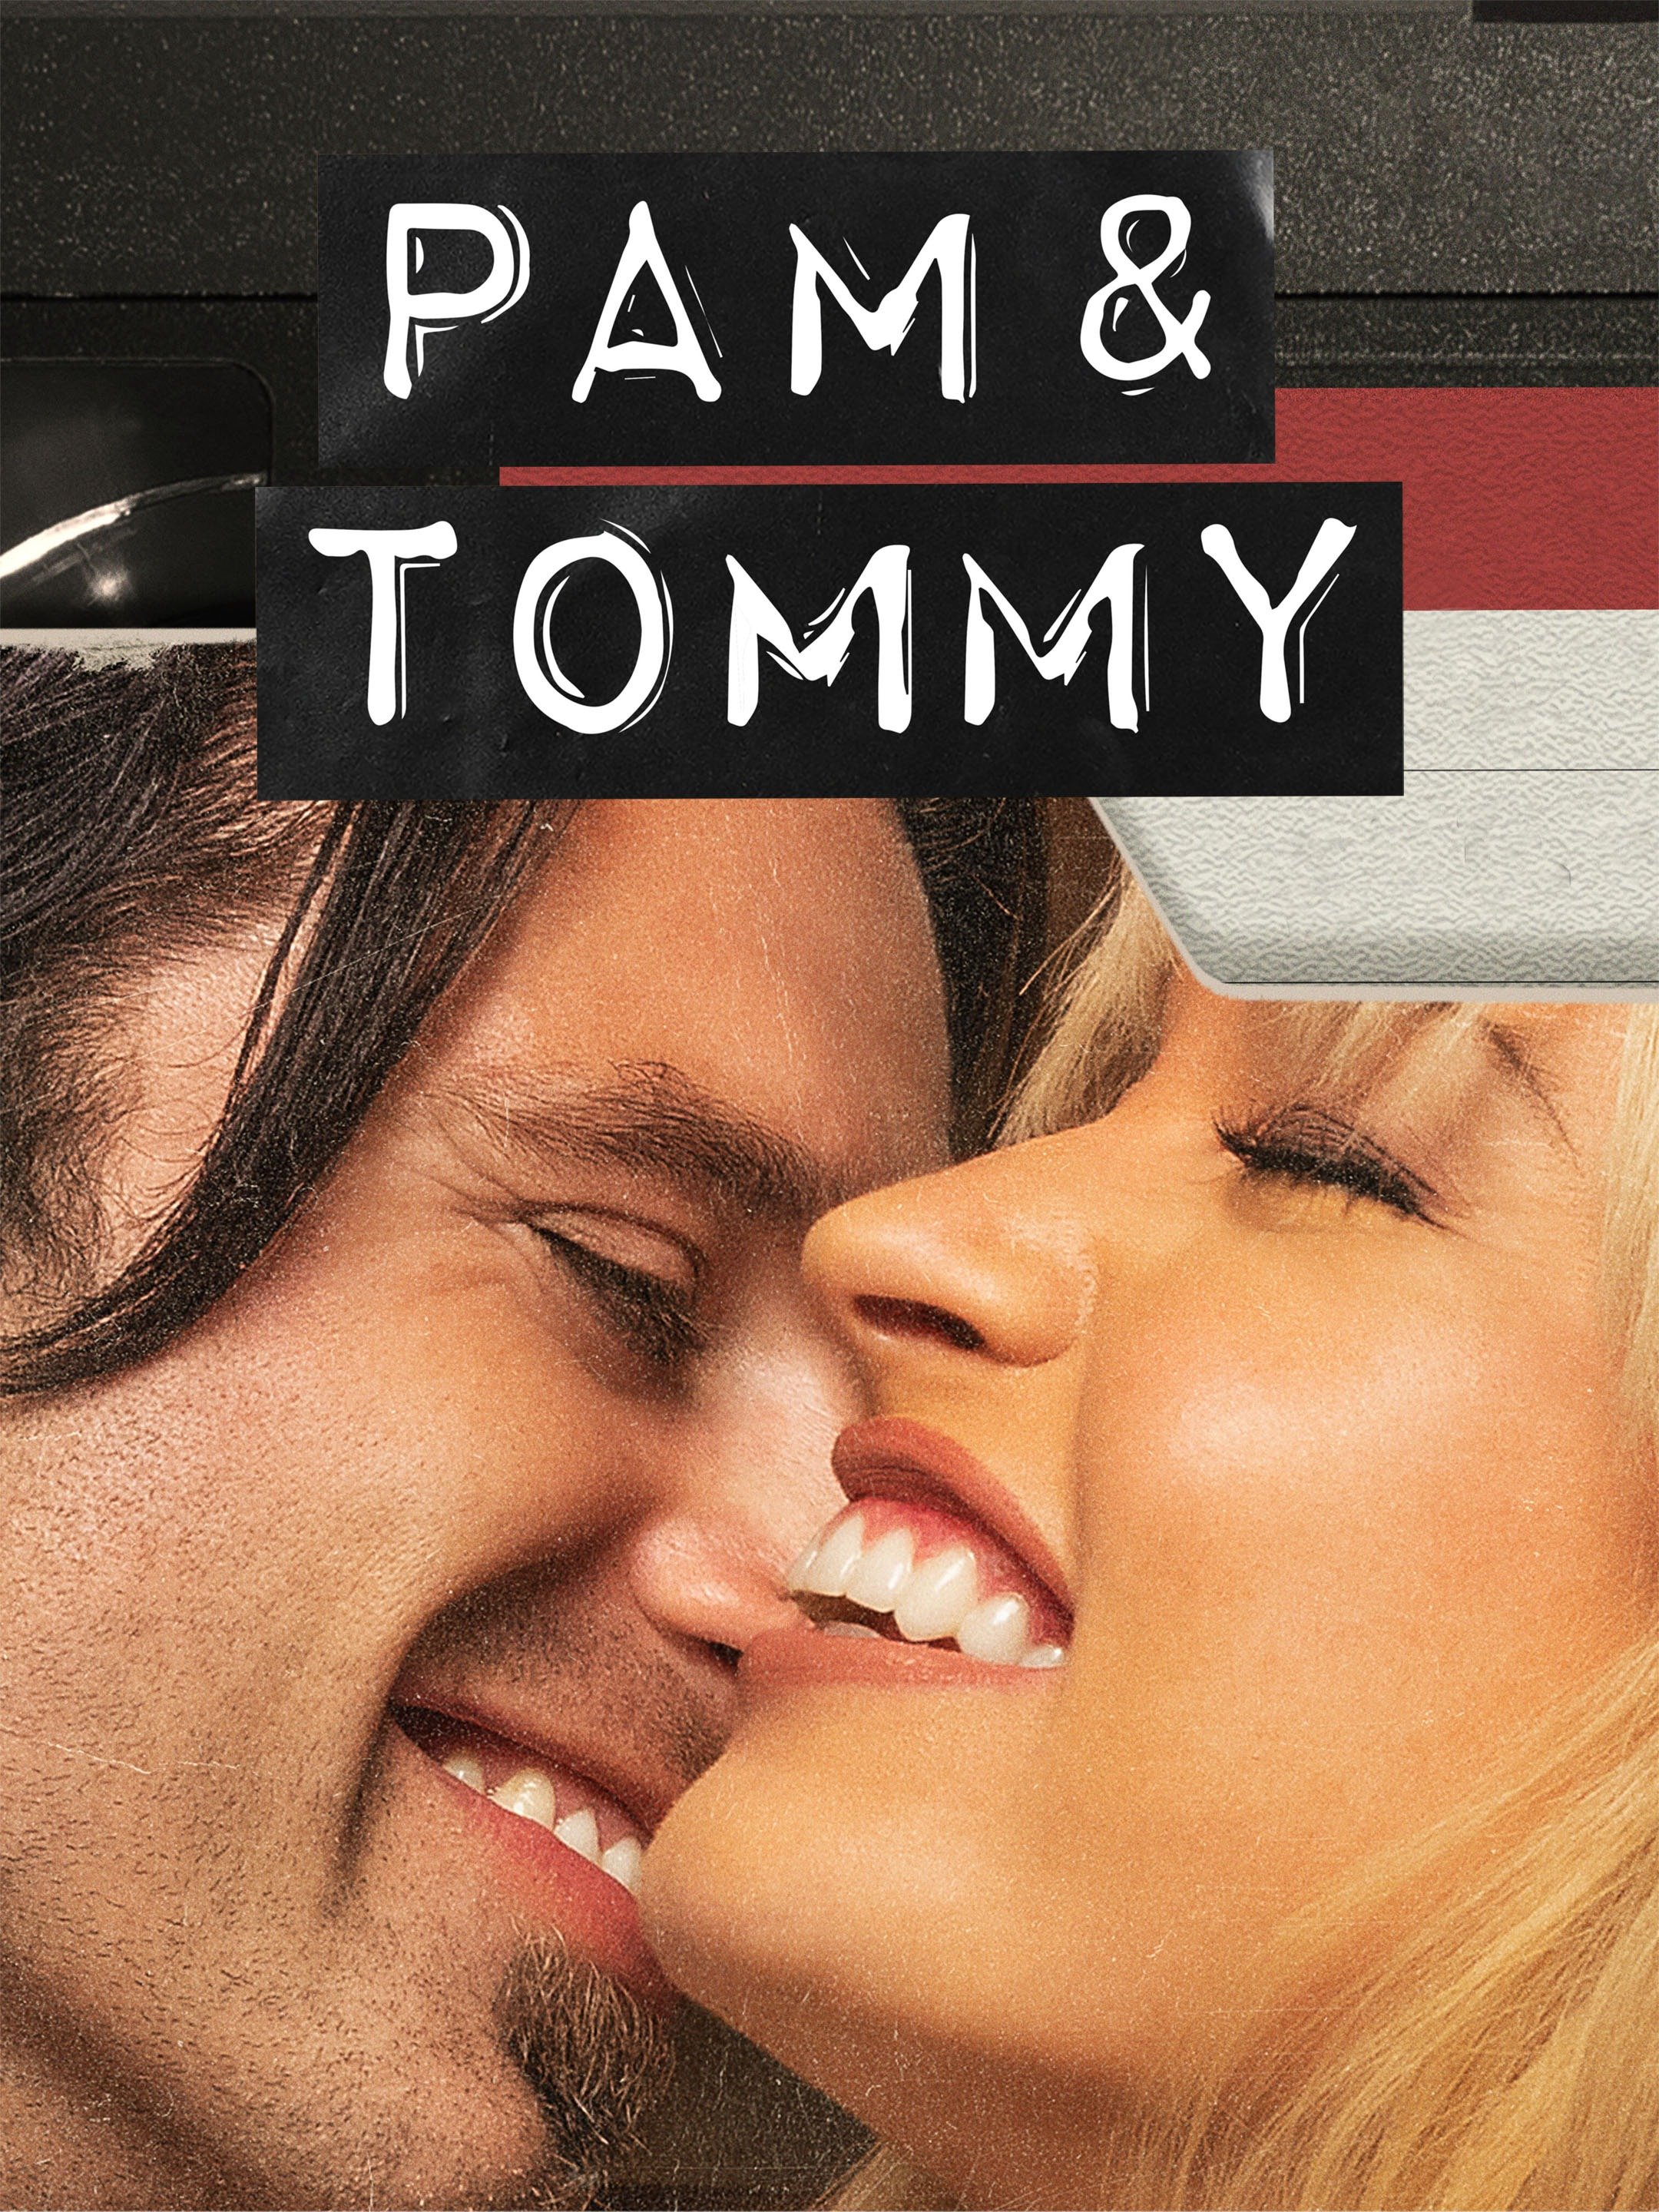 Pam And Tommy Limited Series Episode 5 Trailer Trailers And Videos Rotten Tomatoes 